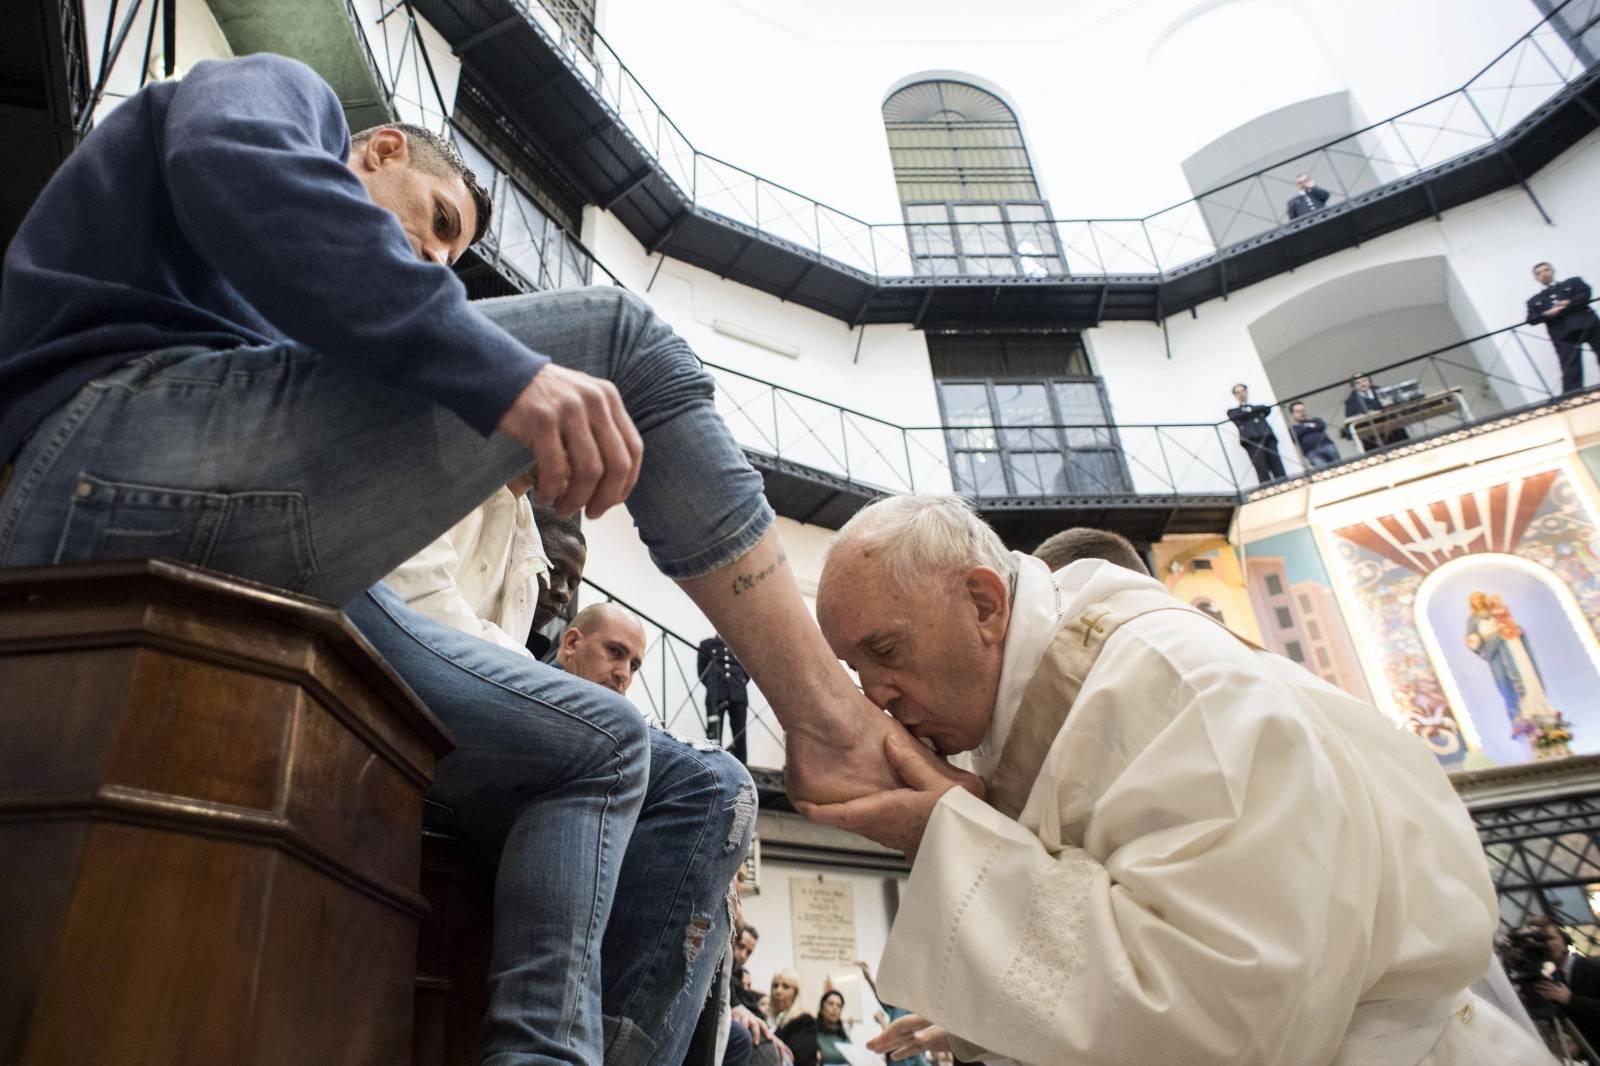 March 30, 2018 : Pope Francis washed the feet of 12 prisoners Christians, Muslims and one Buddhist at the Mass of Our Lord's Supper on Easter Holy Thursday afternoon at Regina Coeli prison in Rome.